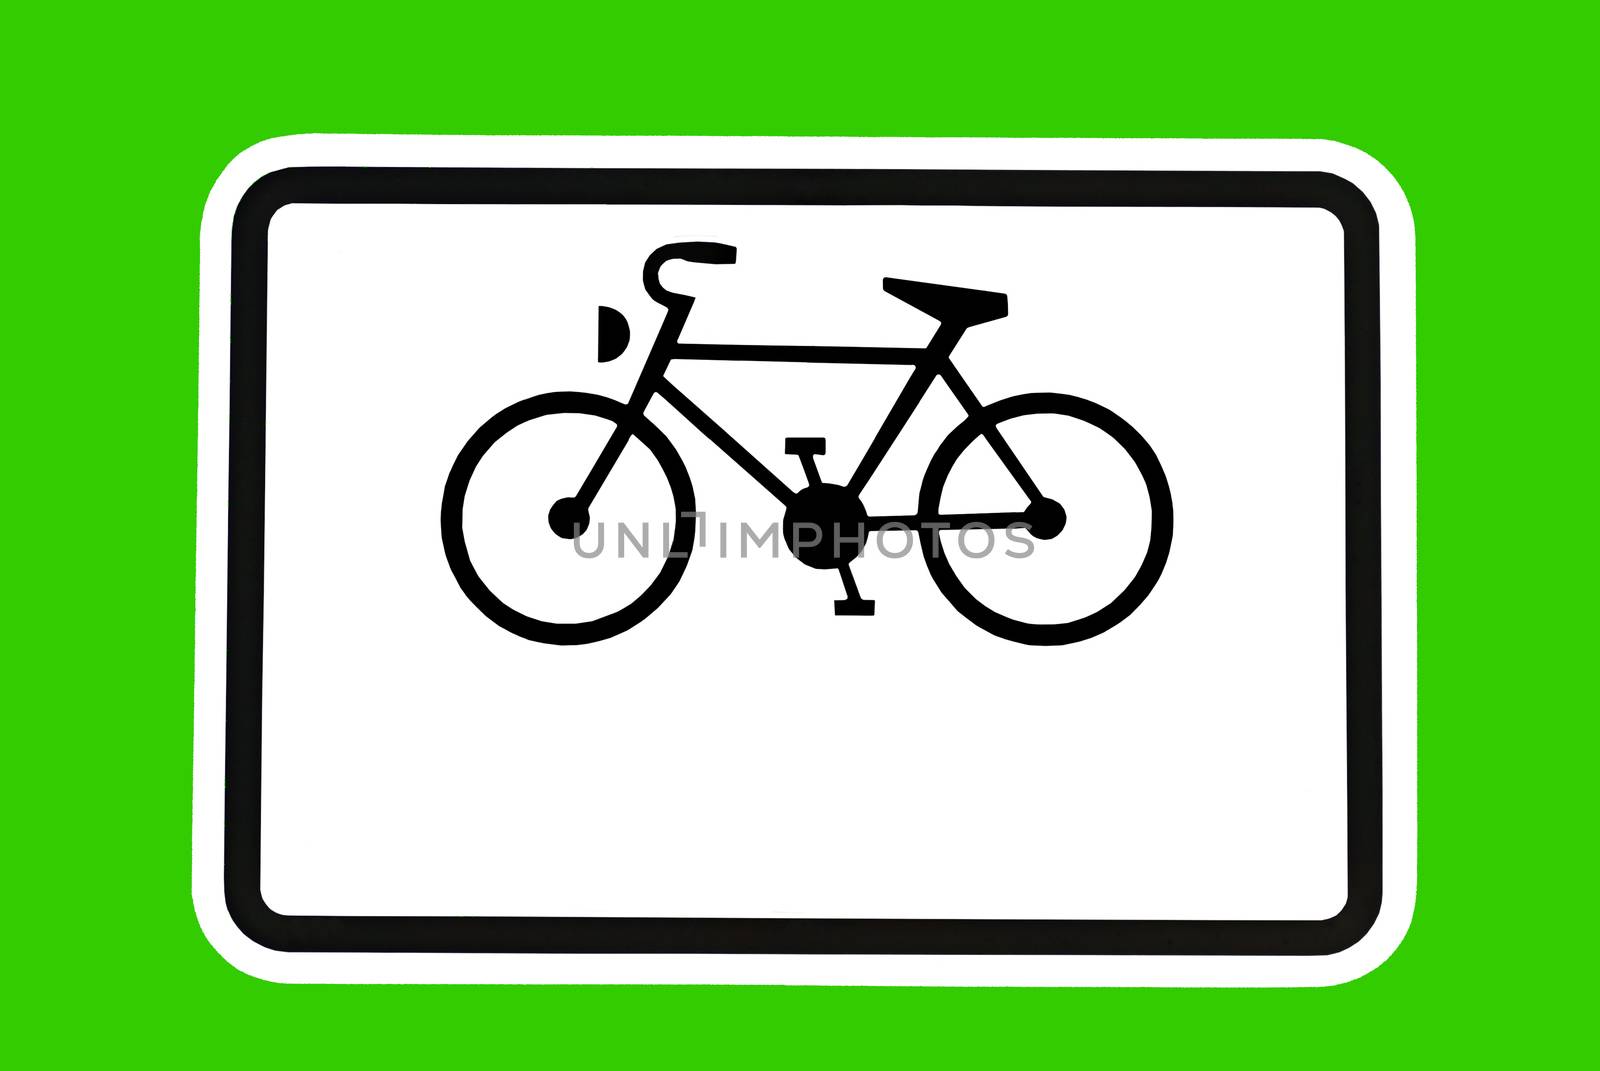 A bicycle on a traffic sign. Optional.